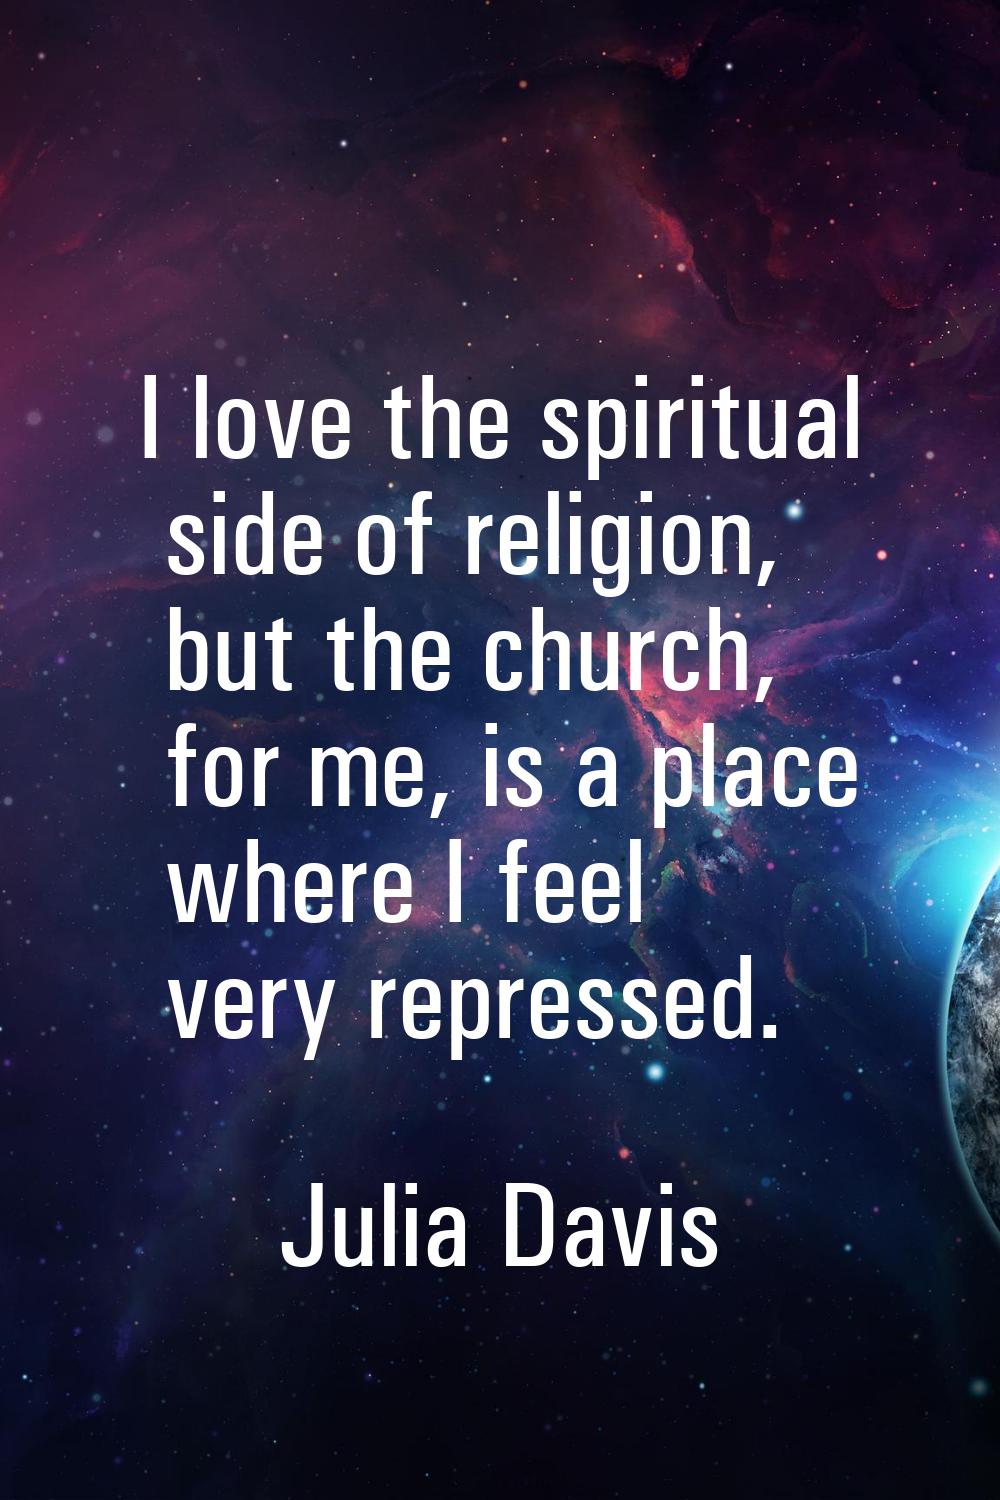 I love the spiritual side of religion, but the church, for me, is a place where I feel very repress